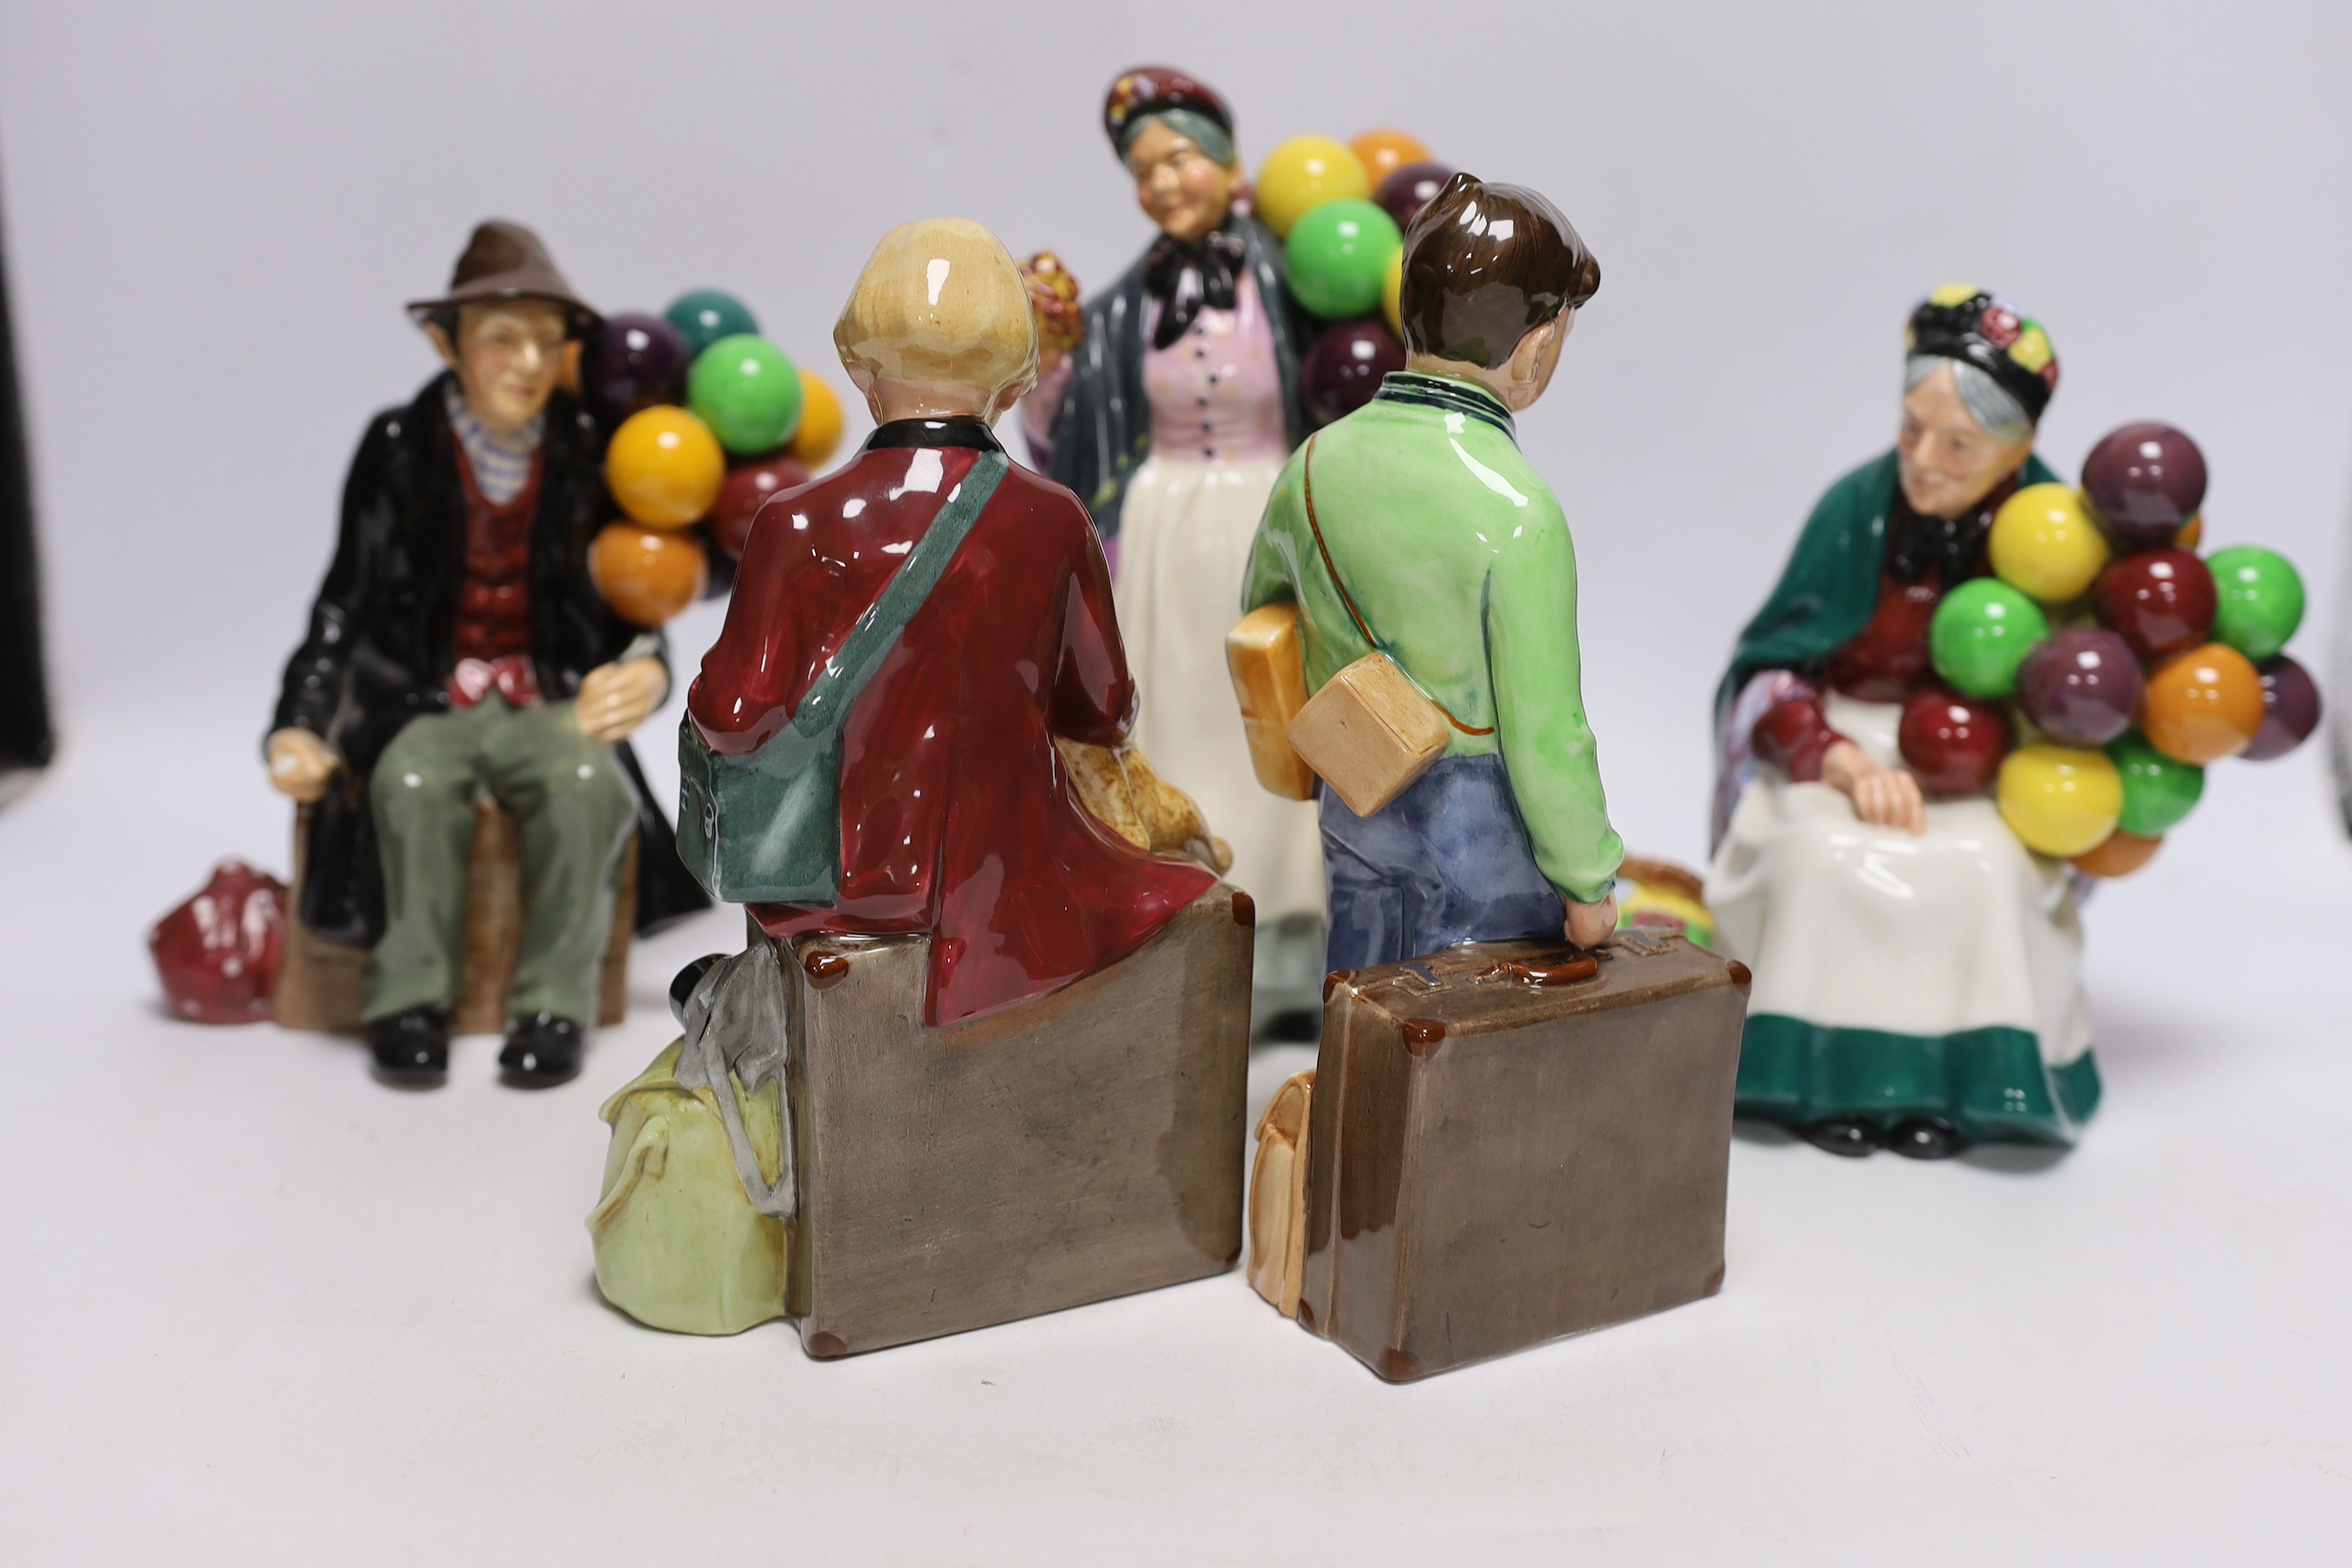 Royal Doulton figures: 'Girl Evacuee' and 'Boy Evacuee', 'The Old Balloon Seller', 'The Balloon Man', 'Diddy Penny Farthing', tallest 23cm high